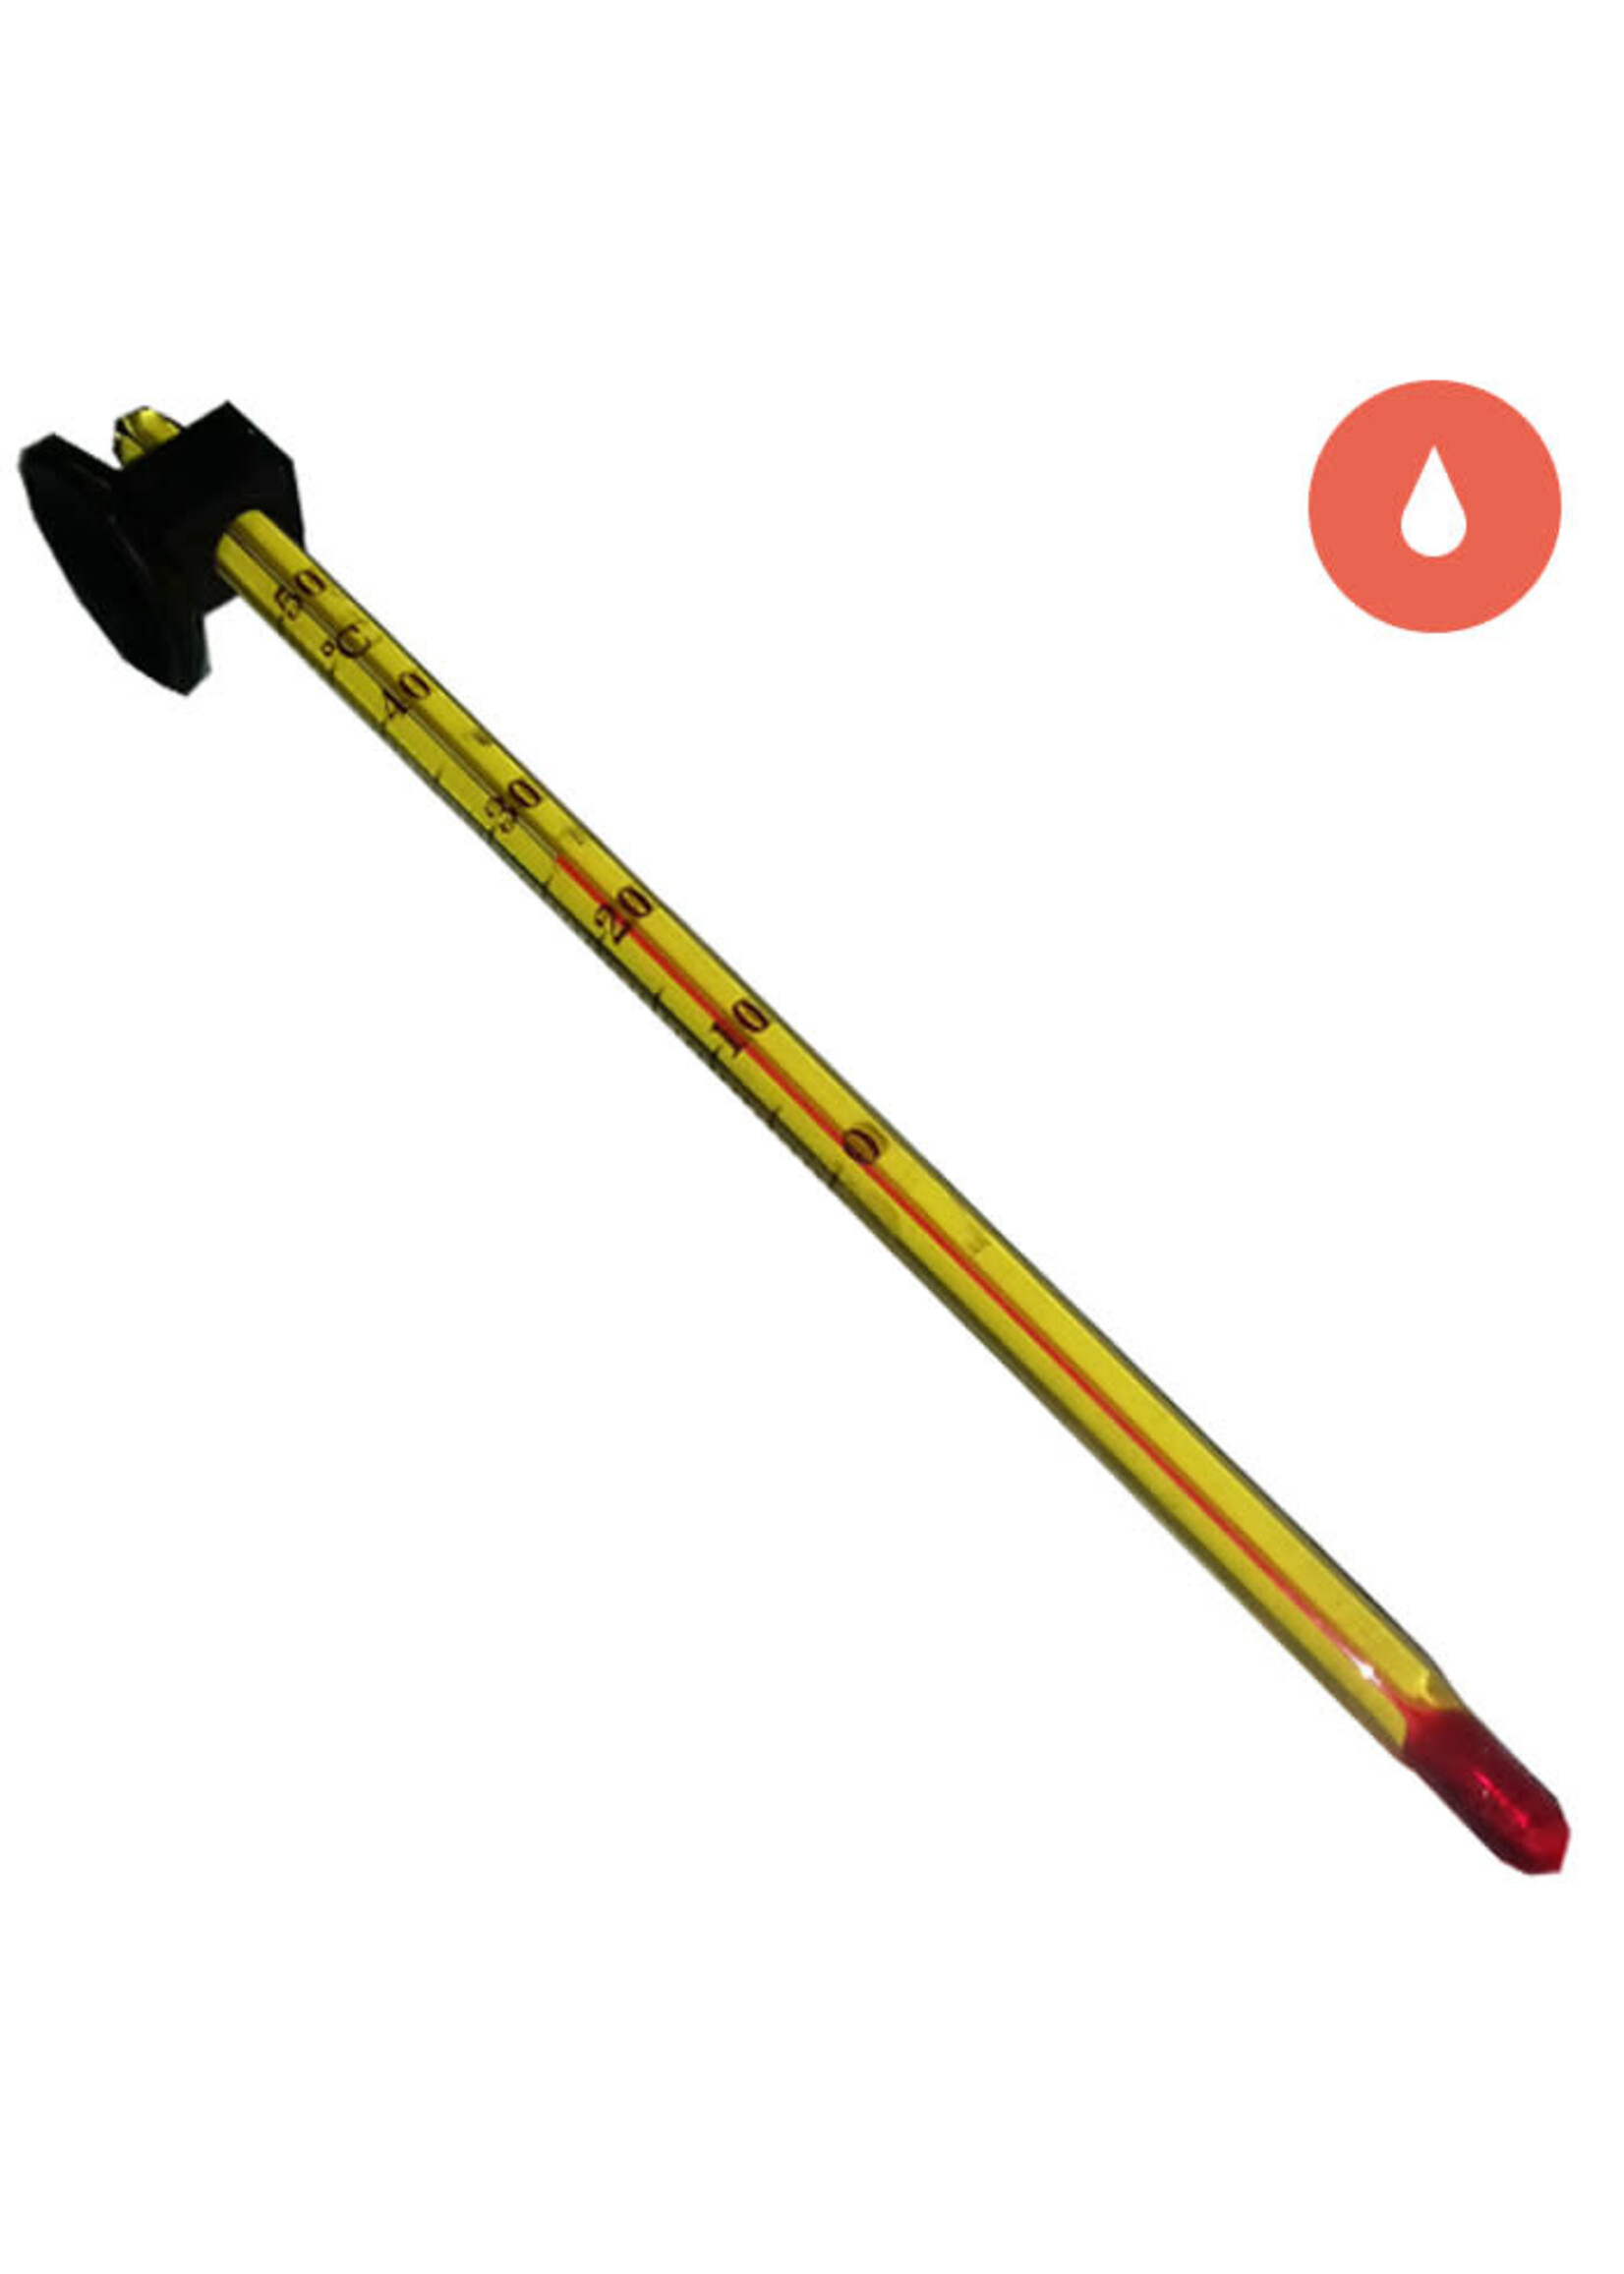 Tape-on Thermometer